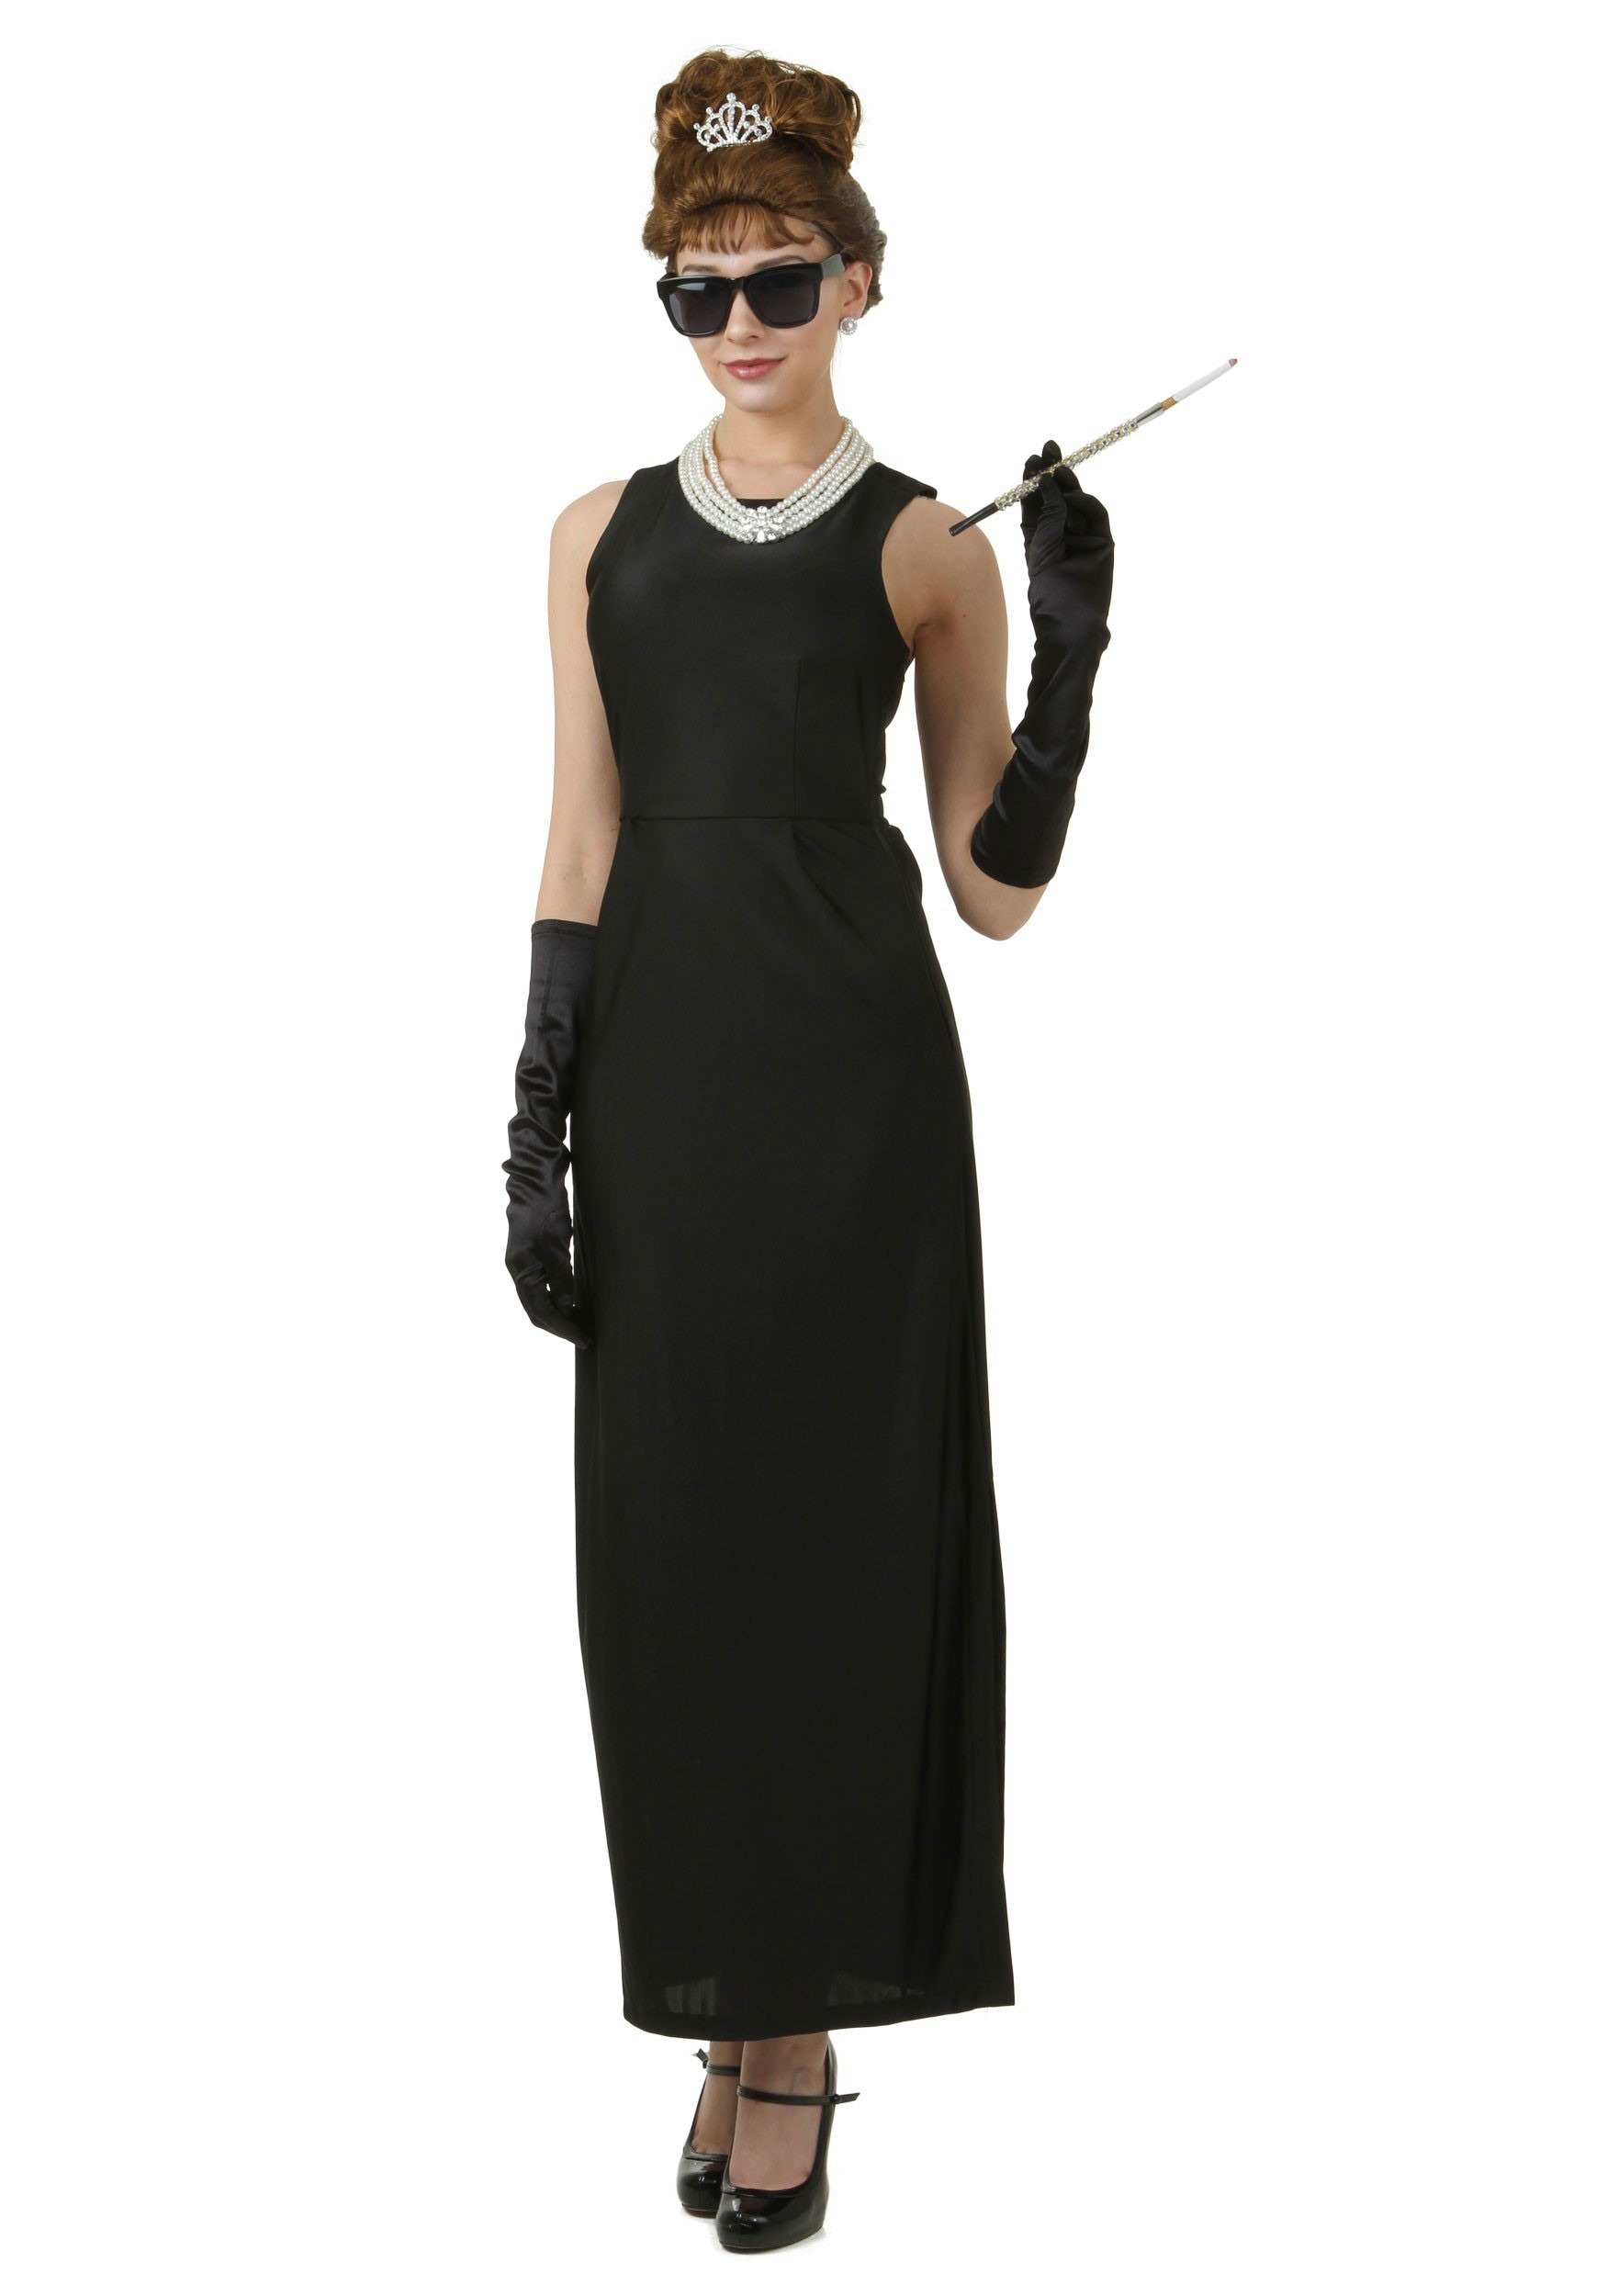 Plus Size Breakfast at Tiffanys Holly Golightly Costume for Women